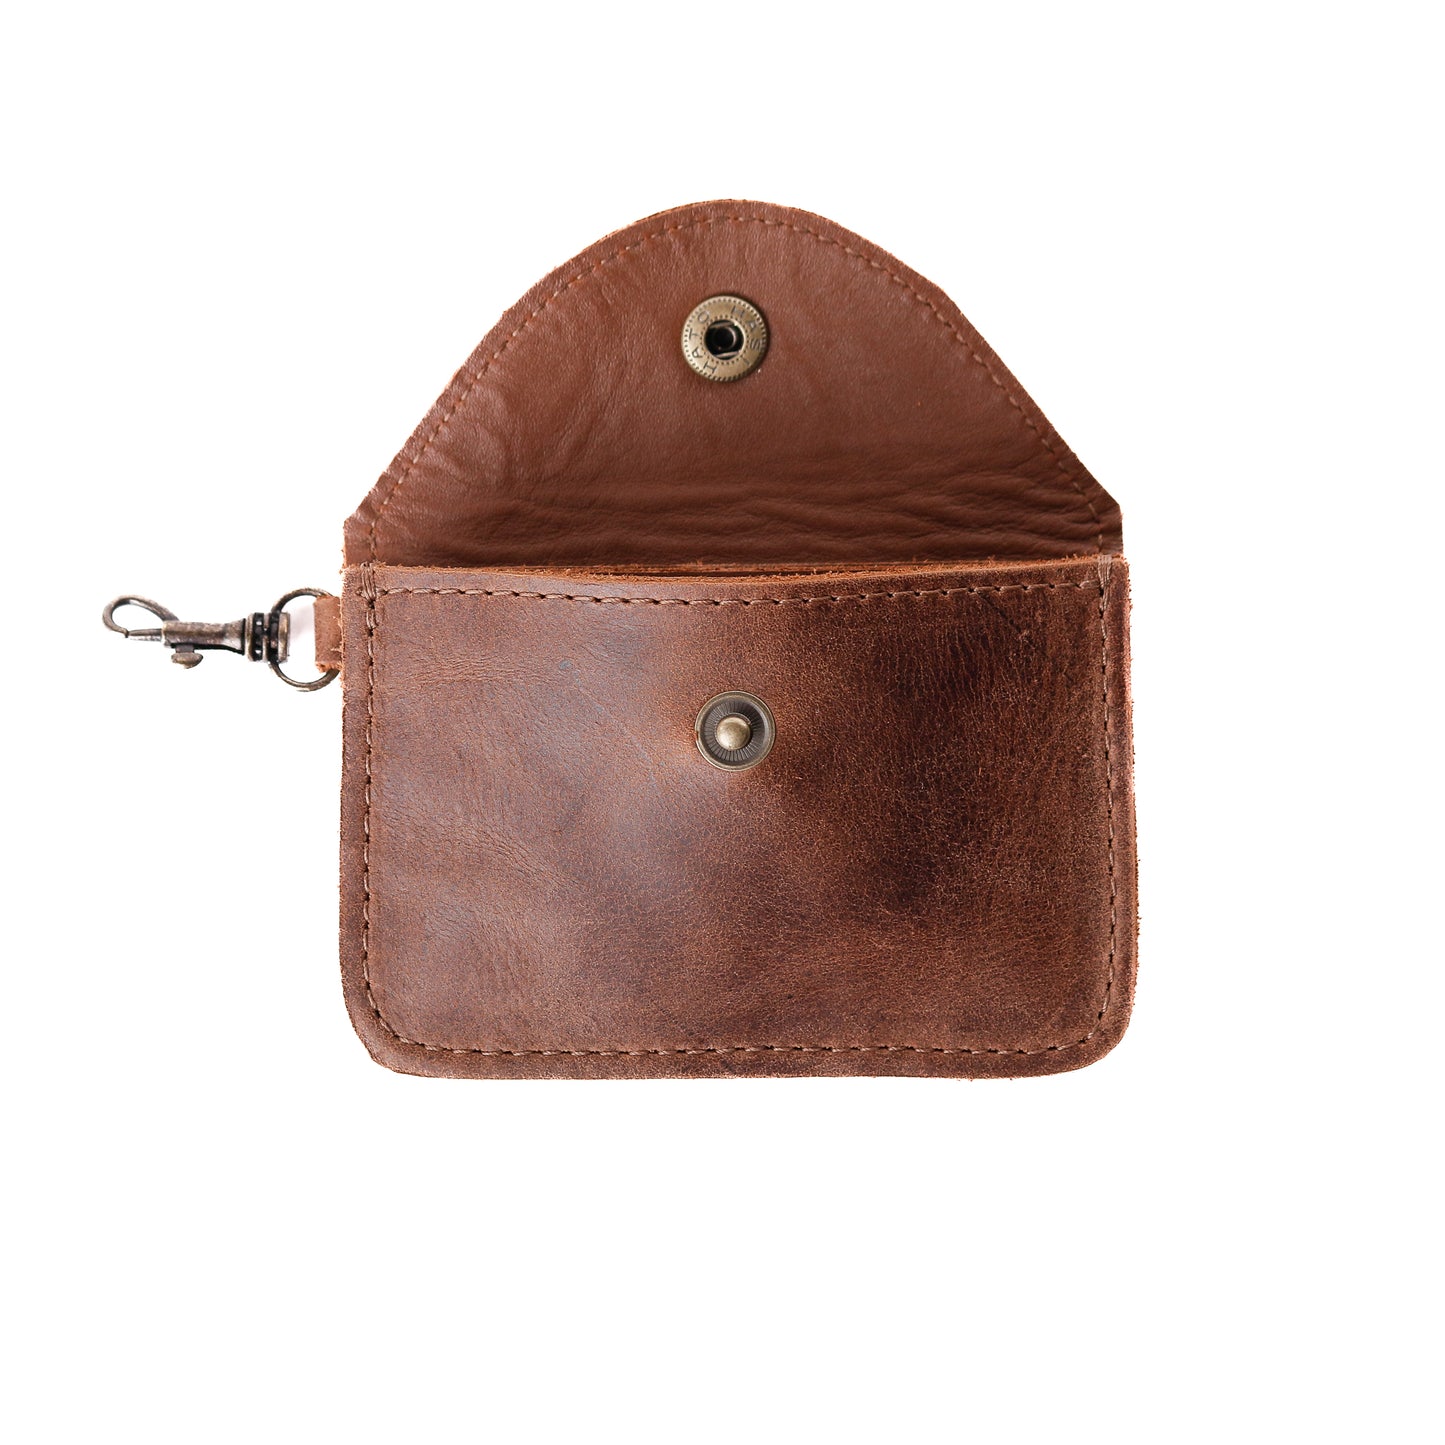 CARD CASE WITH CLASP - FULL LEATHER COLLECTION - CAOBA LEATHER